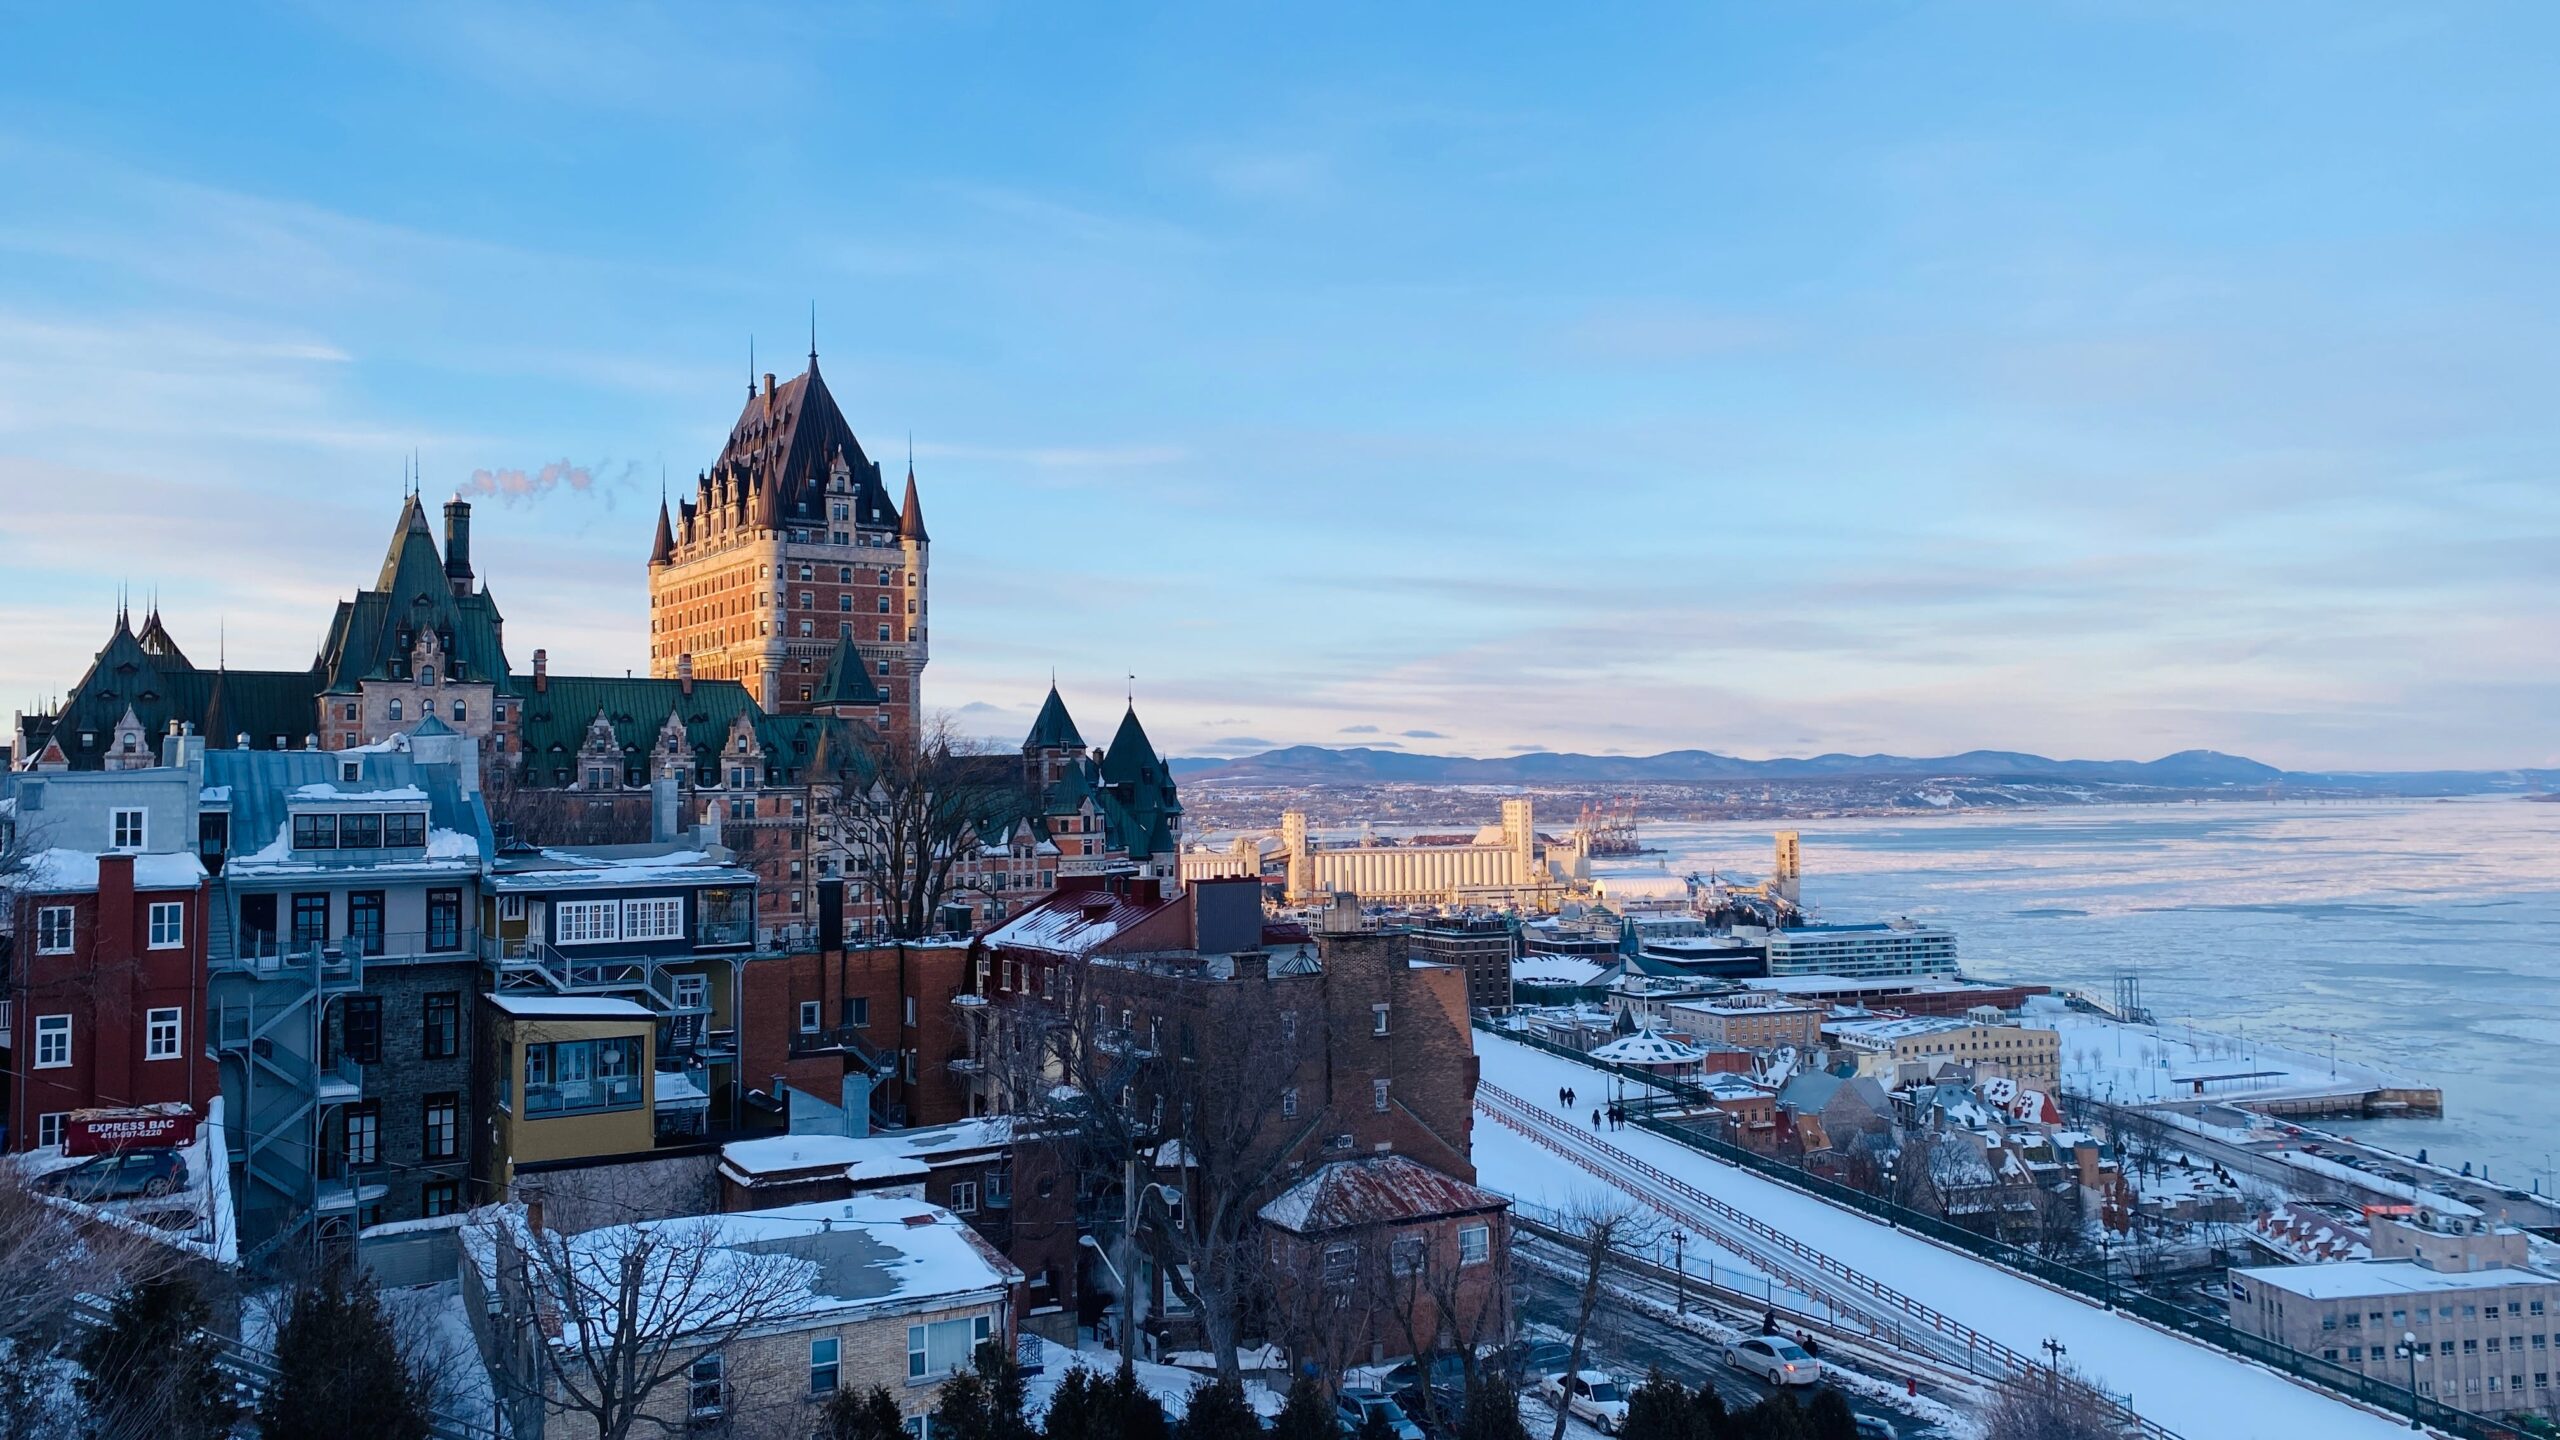 Historic Quebec City illuminated in winter – a cultural hub for student travelers exploring Canada.